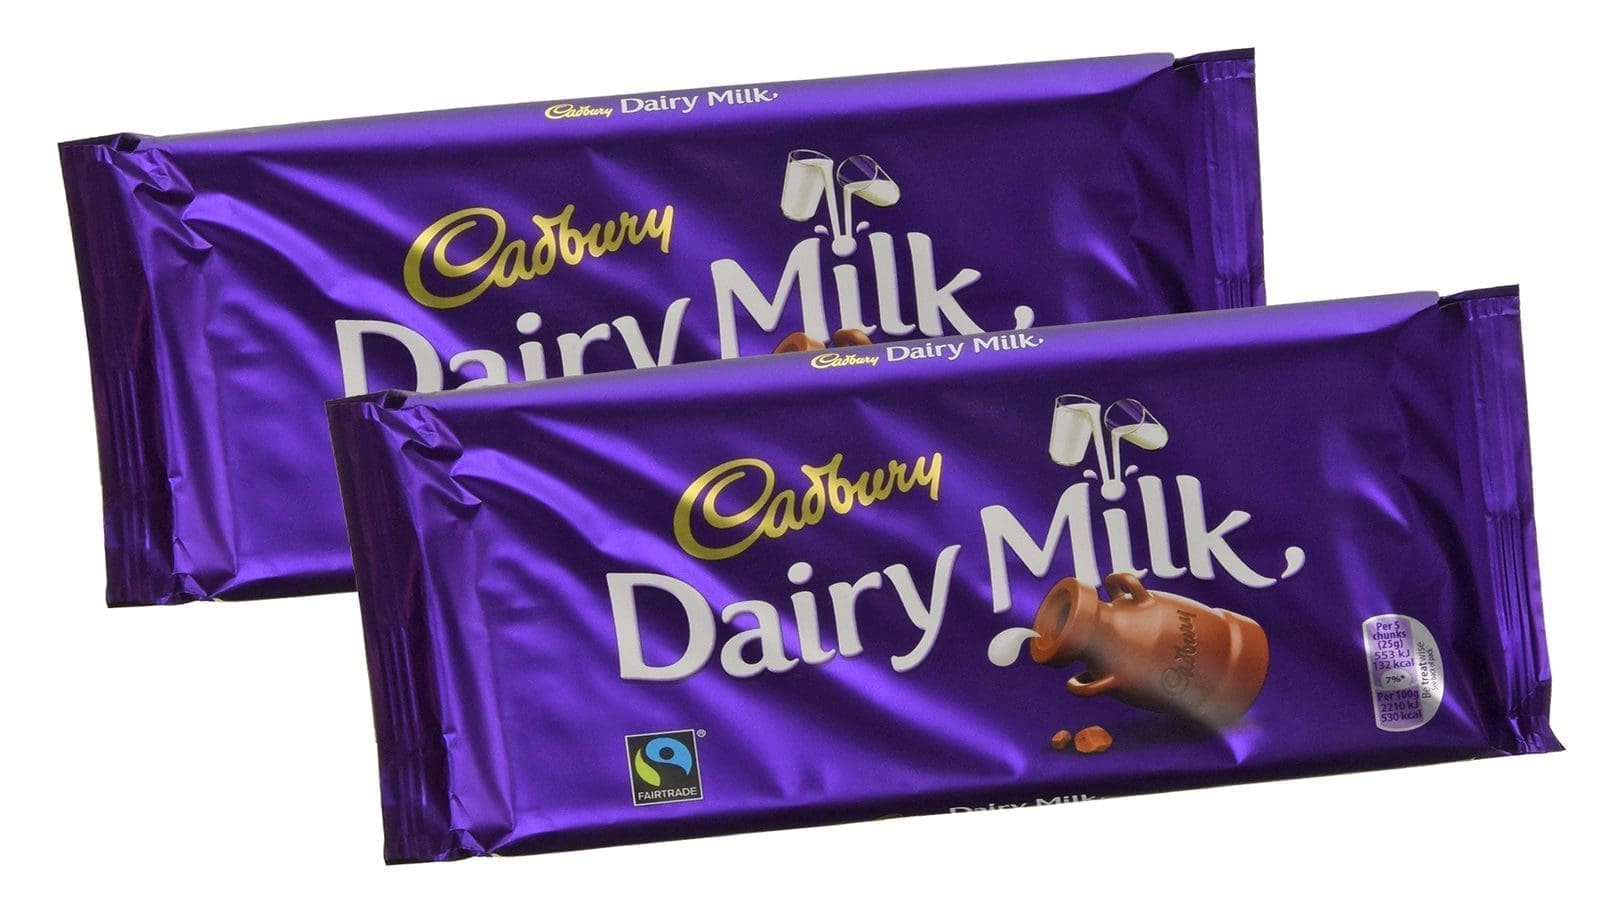 Cadbury Dairy Milk enhances sustainability profile with switch to recycled plastic packaging